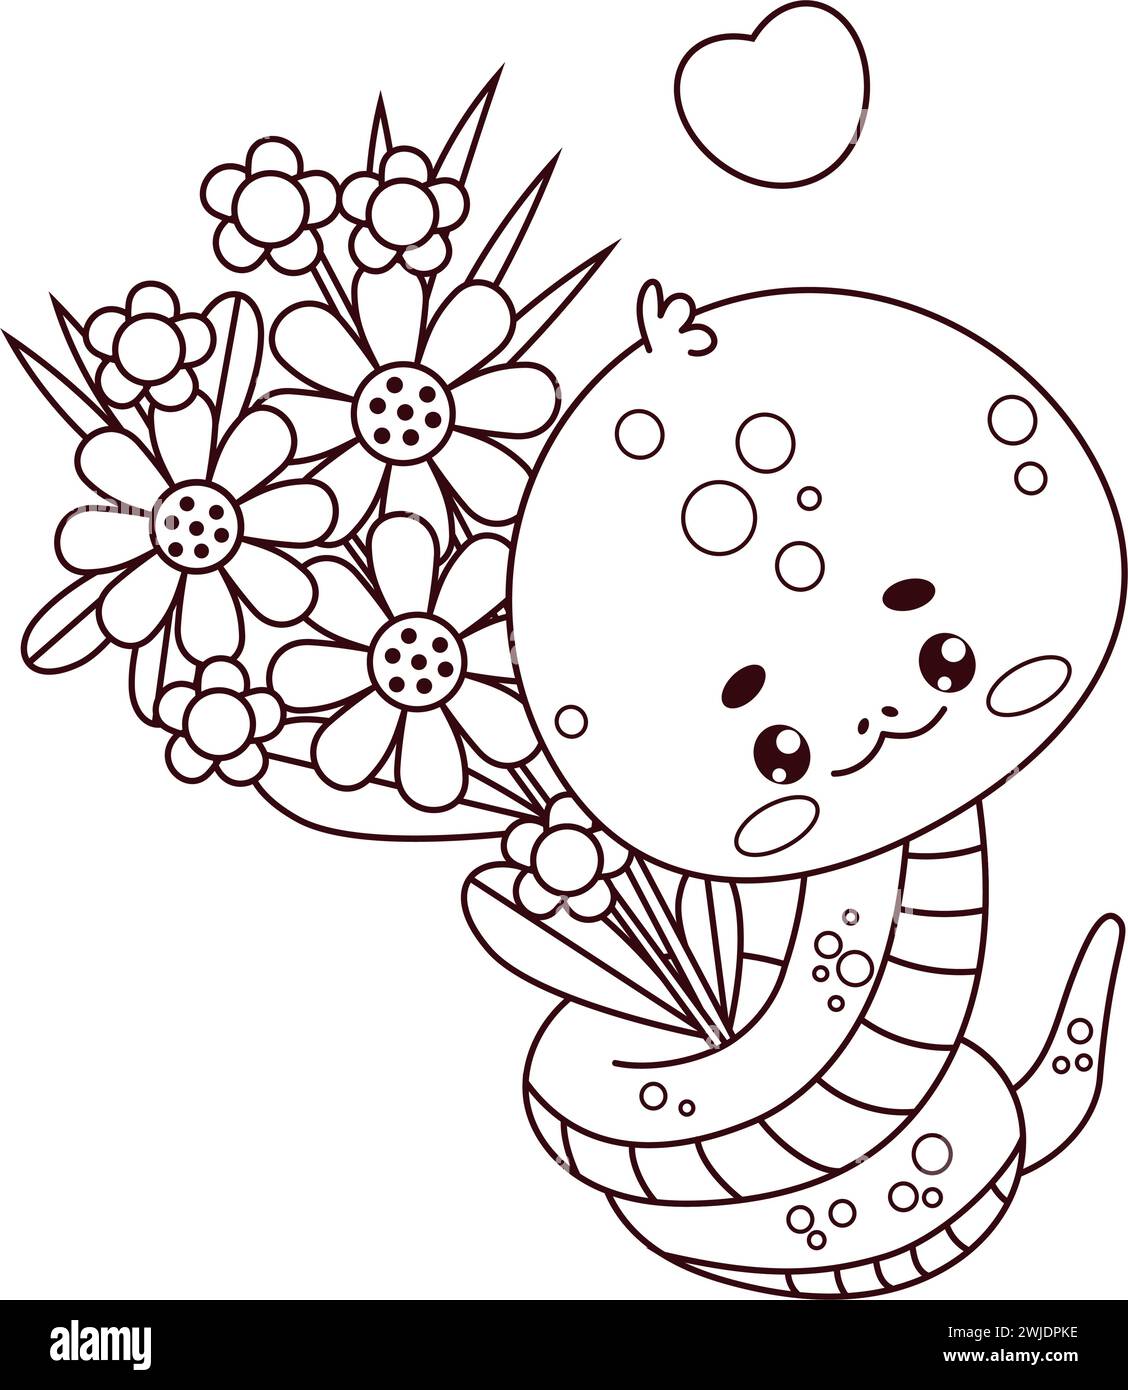 Cute snake with flowers. Romantic reptile kawaii character. Line drawing, coloring book. Vector illustration with cartoon love serpent Stock Vector